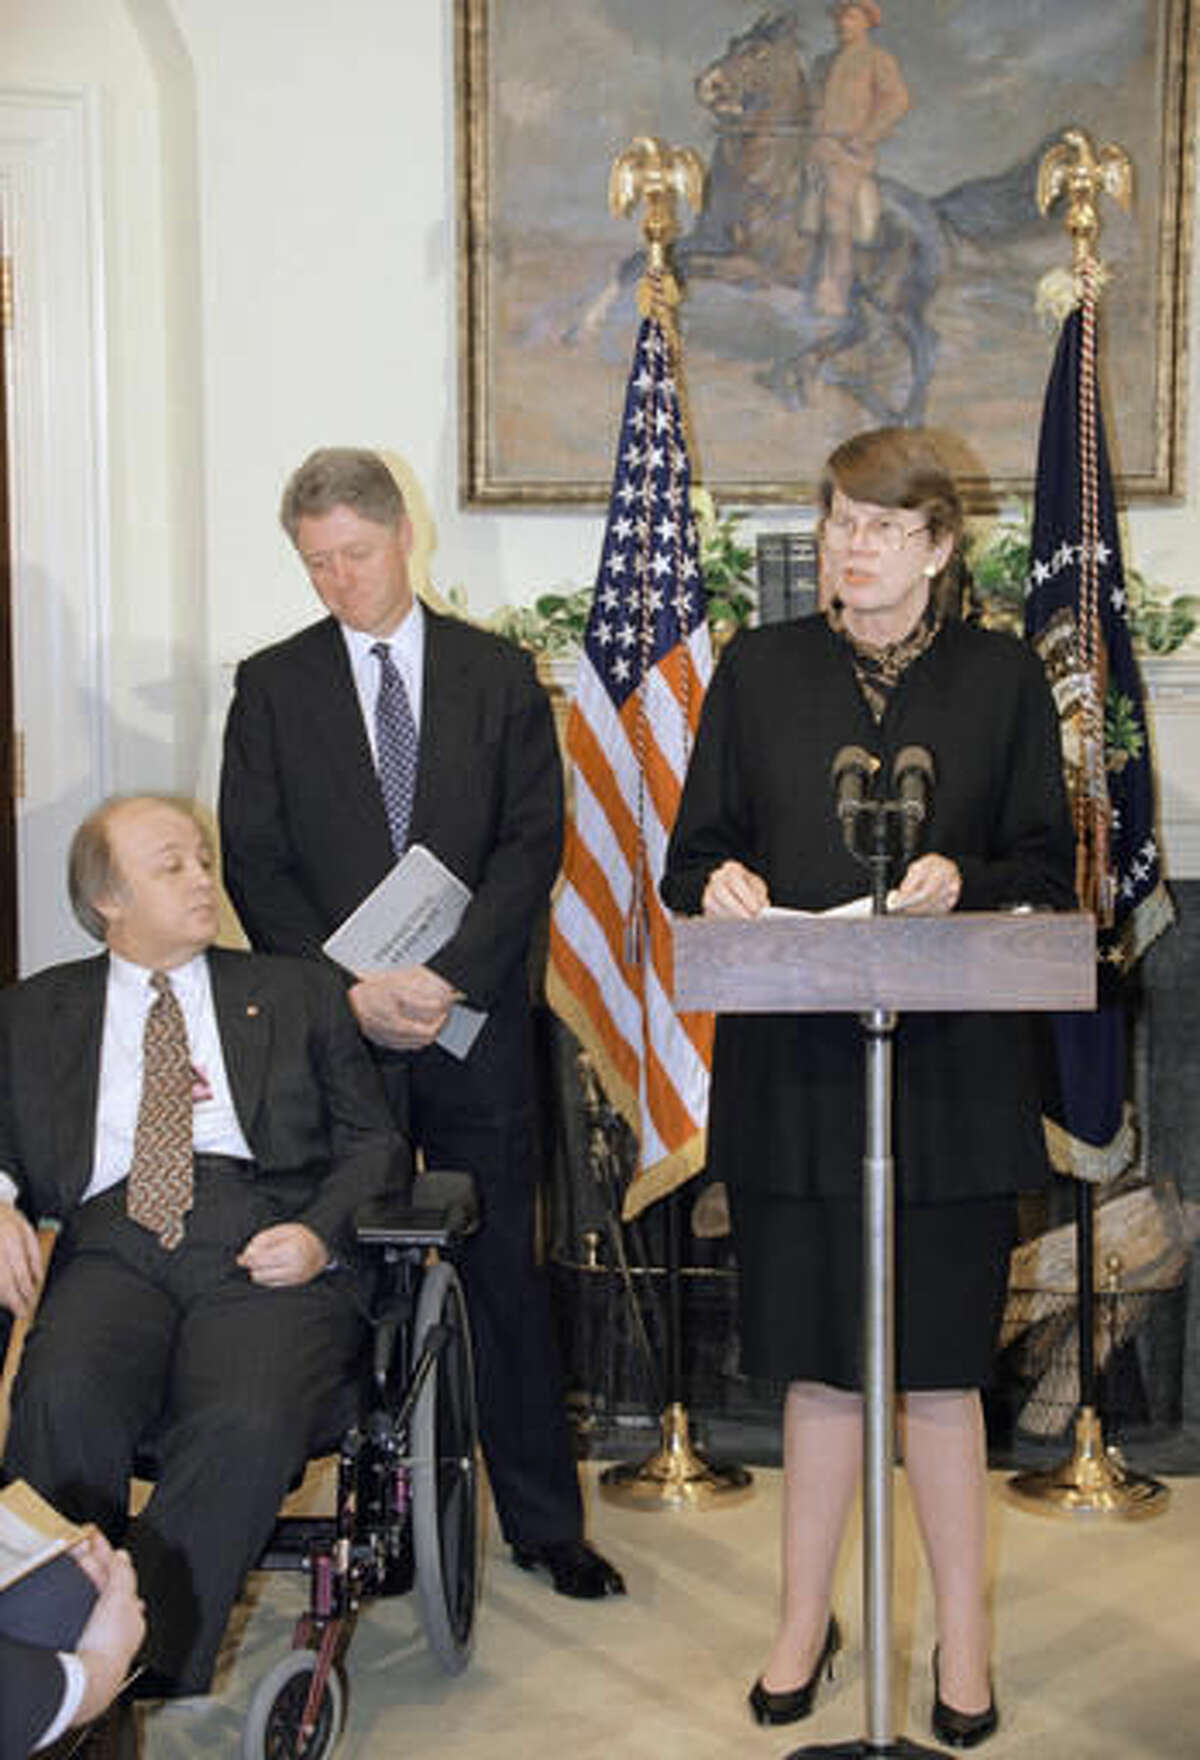 FILE - In this Tuesday, Feb. 28, 1995, file photo, Attorney General Janet Reno, accompanied by President Bill Clinton and James Brady, speaks at the White House during a ceremony marking the one-year anniversary of the Brady handgun control law. Reno, the first woman to serve as U.S. attorney general and the epicenter of several political storms during the Clinton administration, has died early Monday, Nov. 7, 2016. She was 78. (AP Photo/Wilfredo Lee, File)